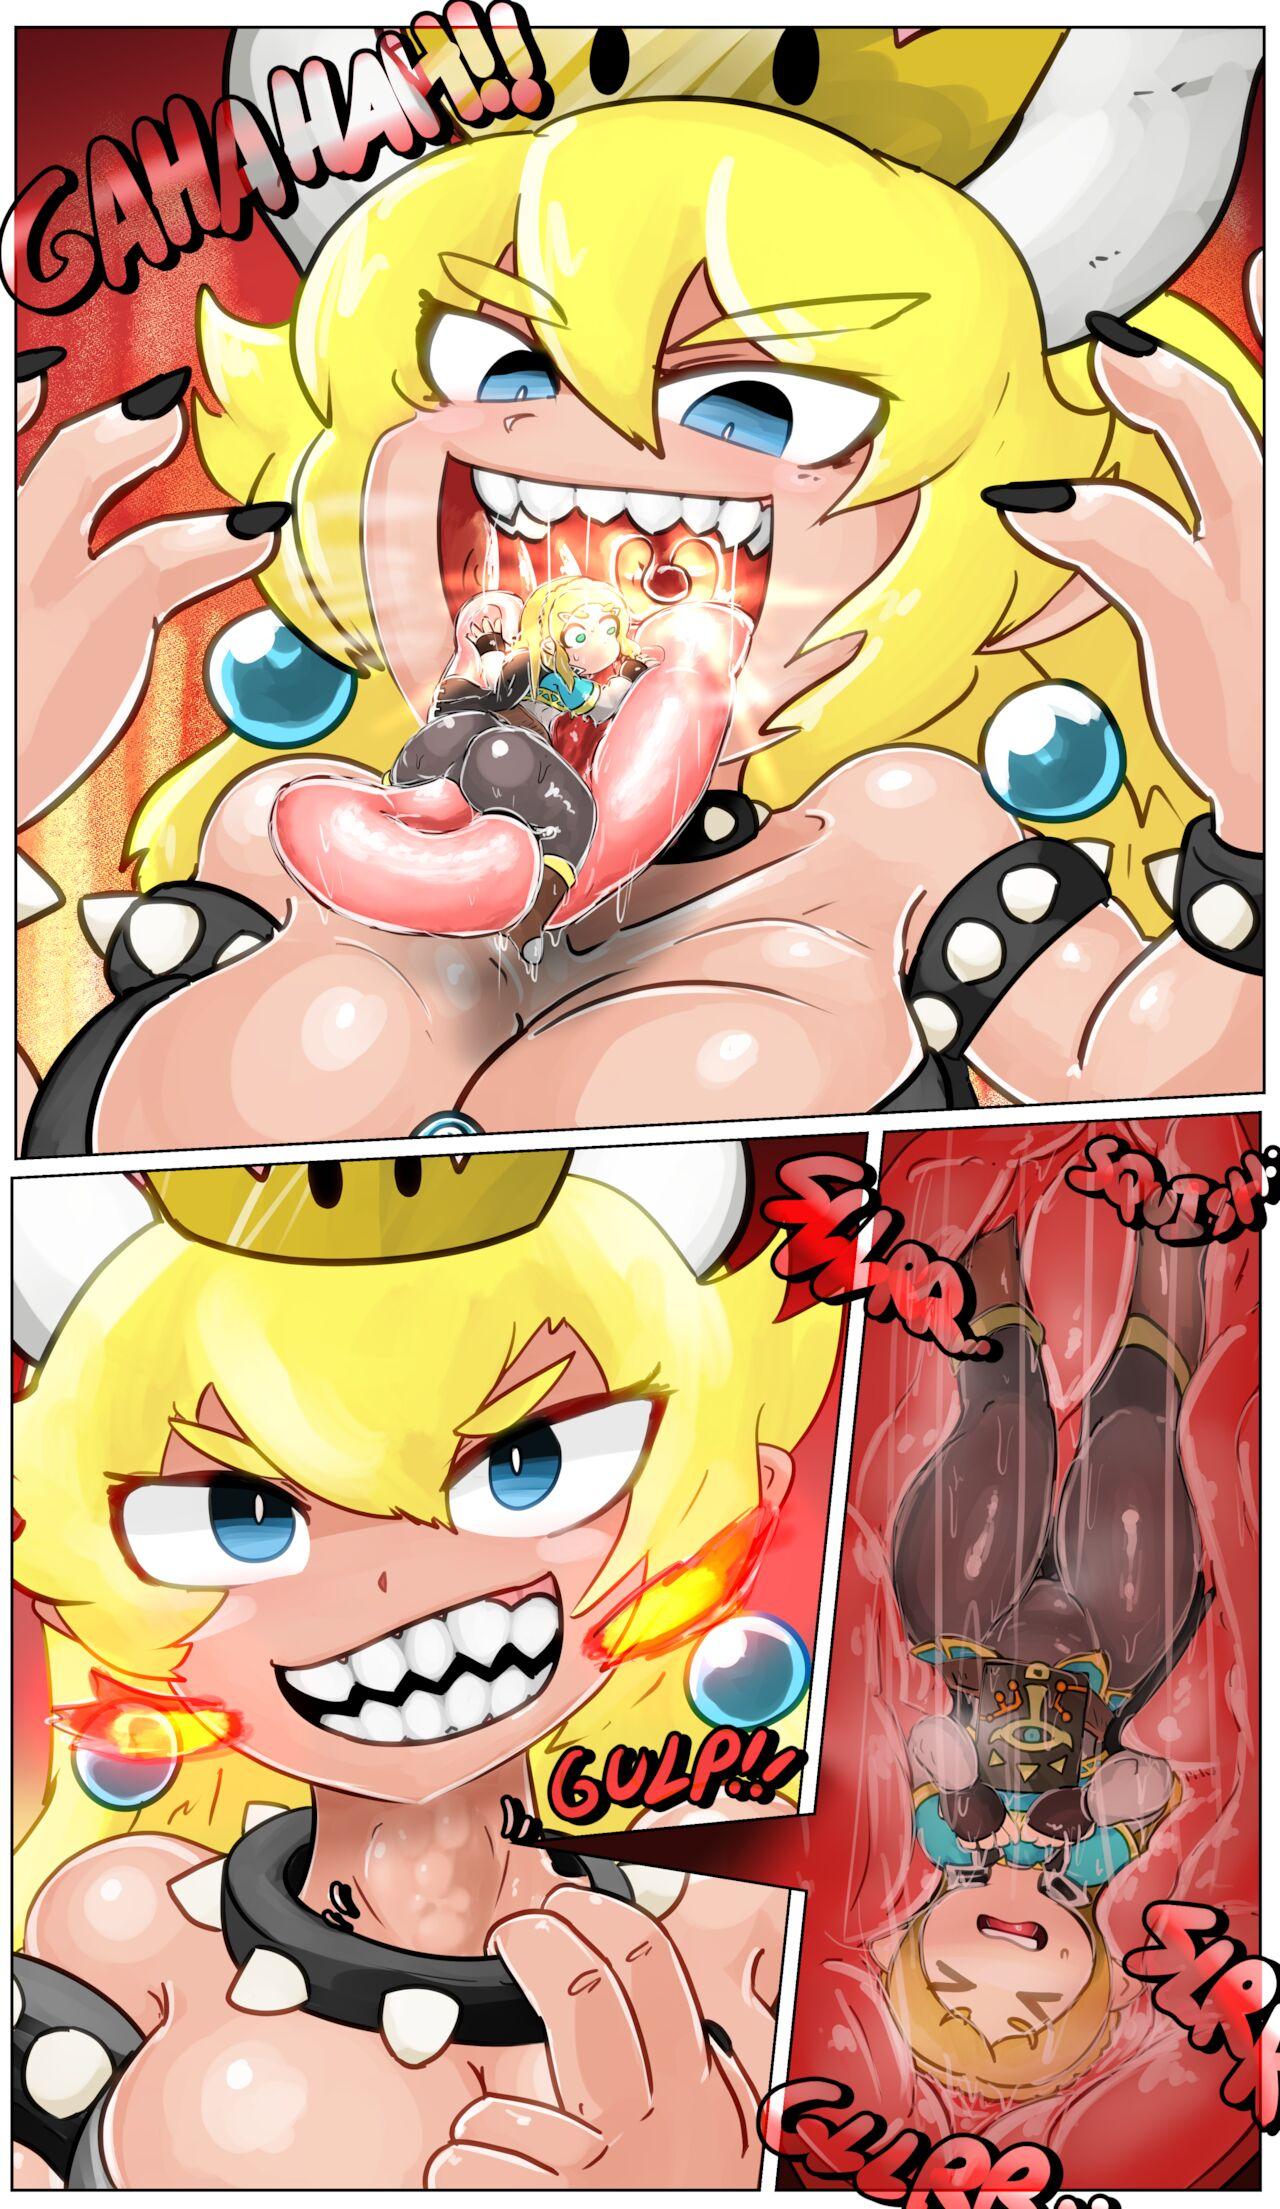 Best Blowjob Ever Bowsette Inside Story - The legend of zelda Super mario brothers | super mario bros. Foreskin - Page 2